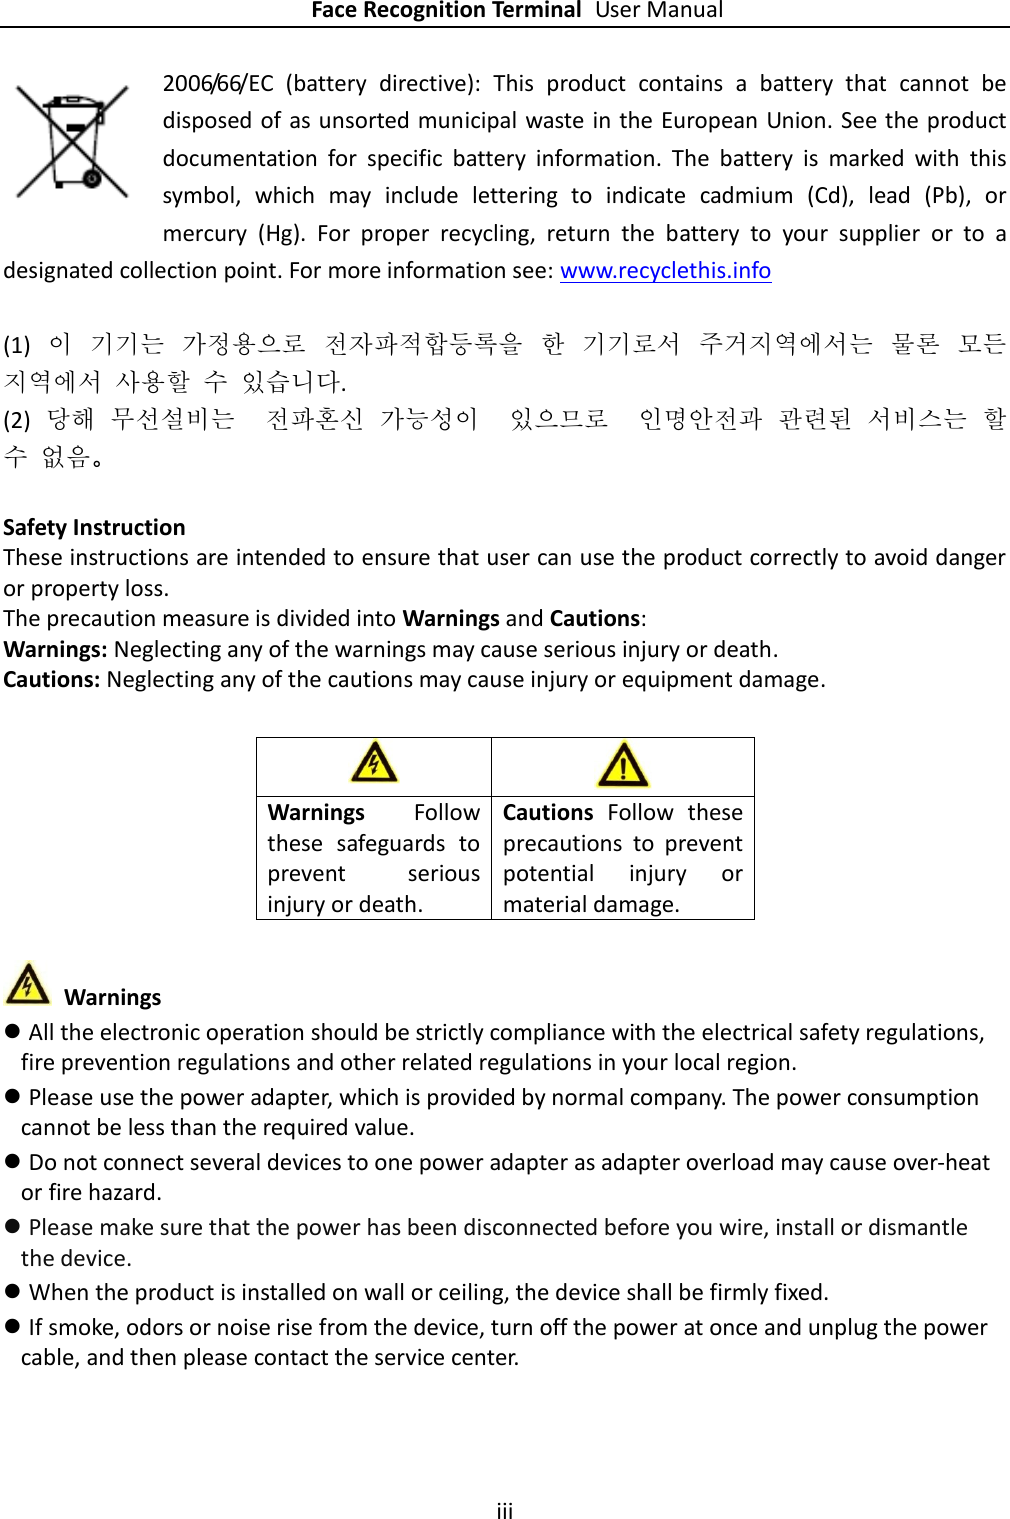 Page 4 of Hangzhou Hikvision Digital Technology K1T604 Face Recognition Terminal User Manual 